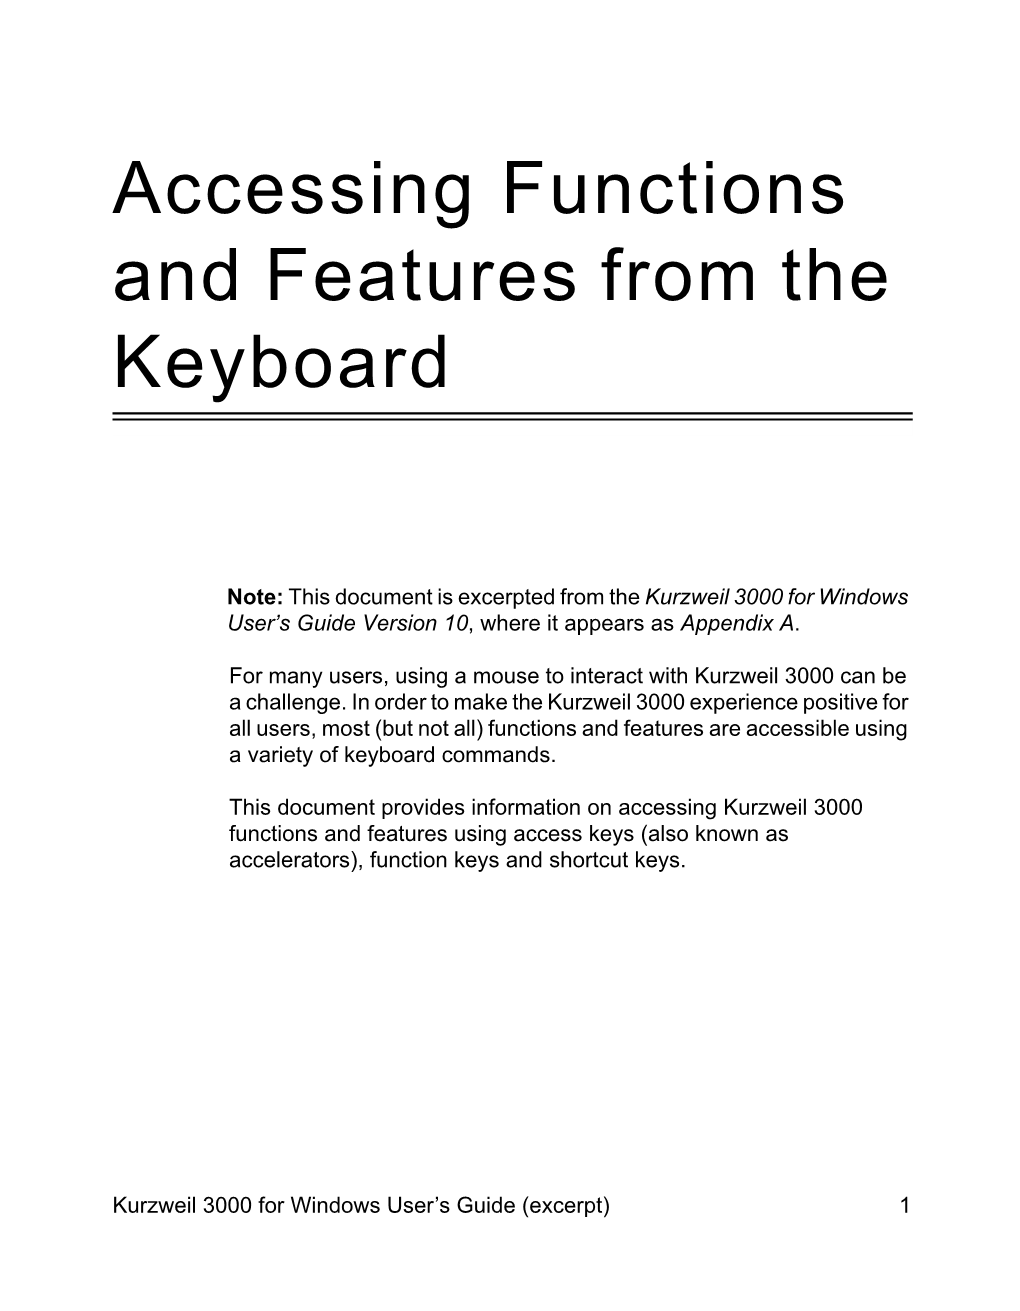 Accessing Functions and Features from the Keyboard